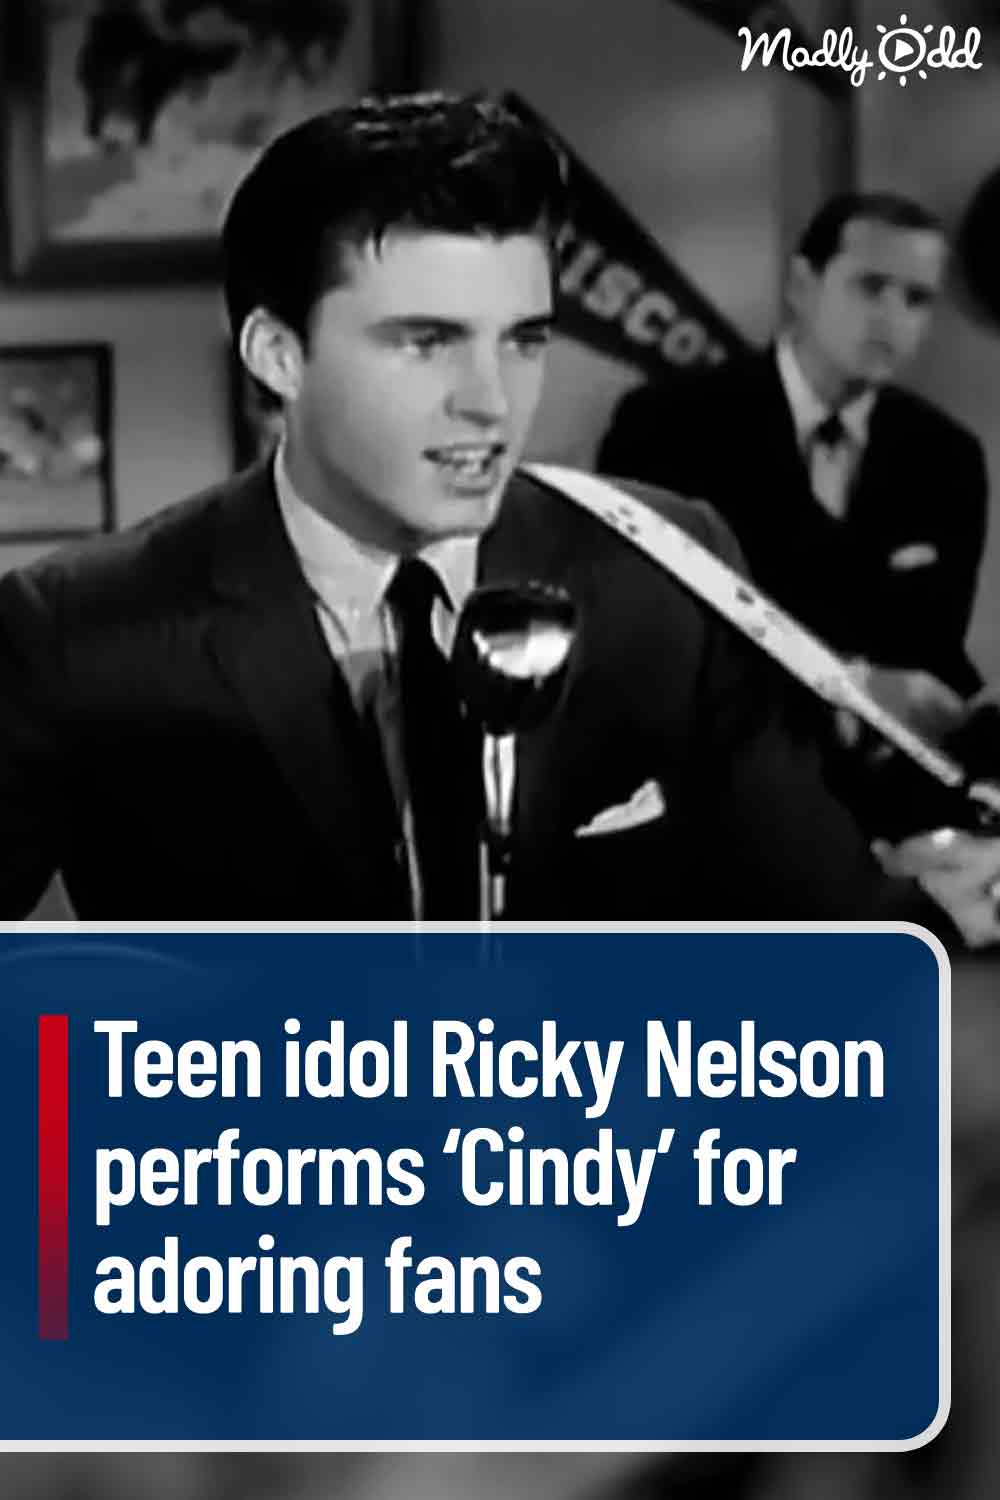 Teen idol Ricky Nelson performs ‘Cindy’ for adoring fans